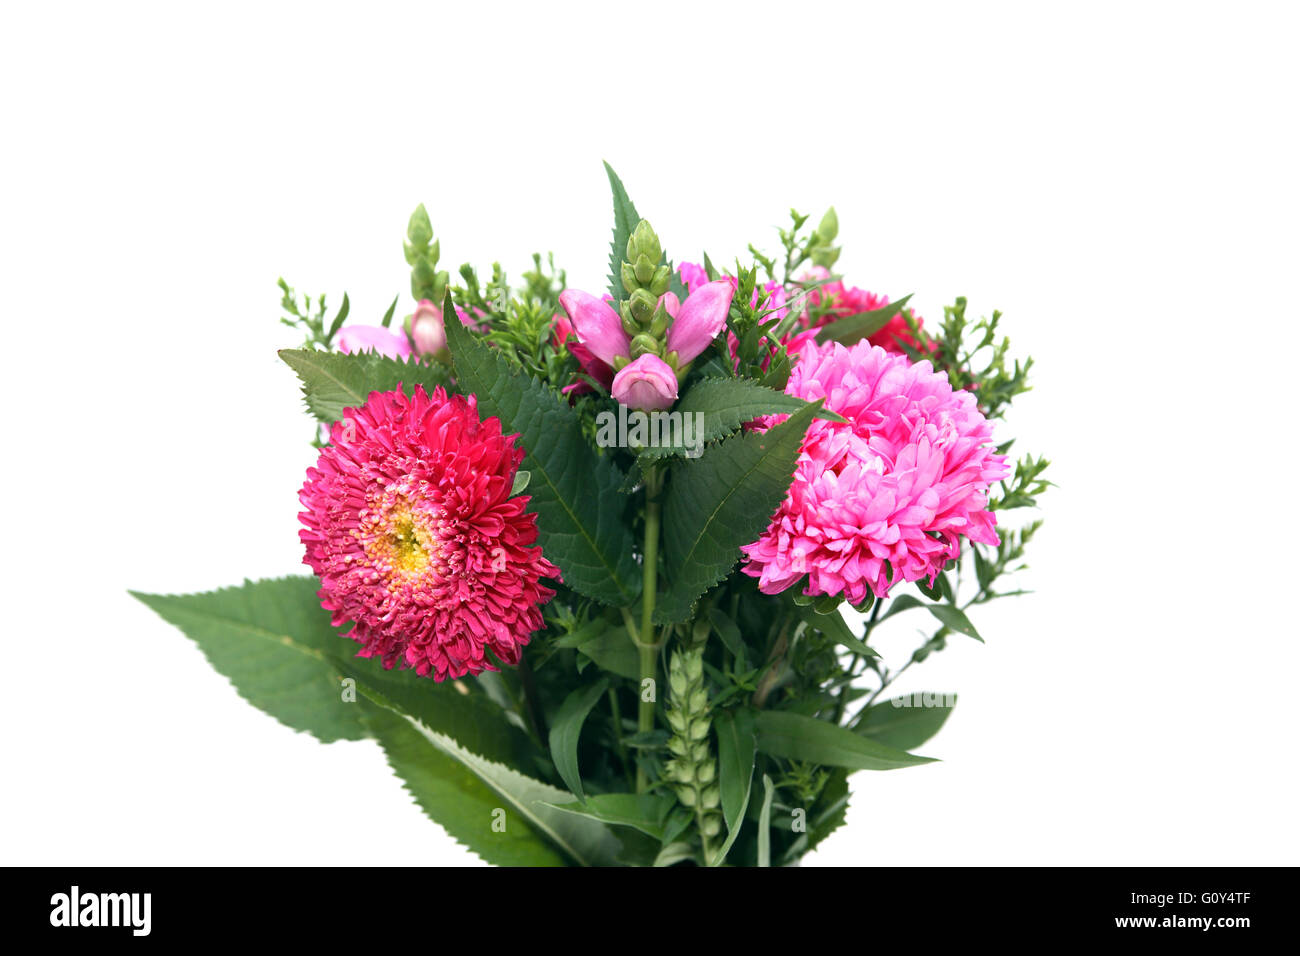 Beautiful bunch of cultivated flowers on white background Stock Photo